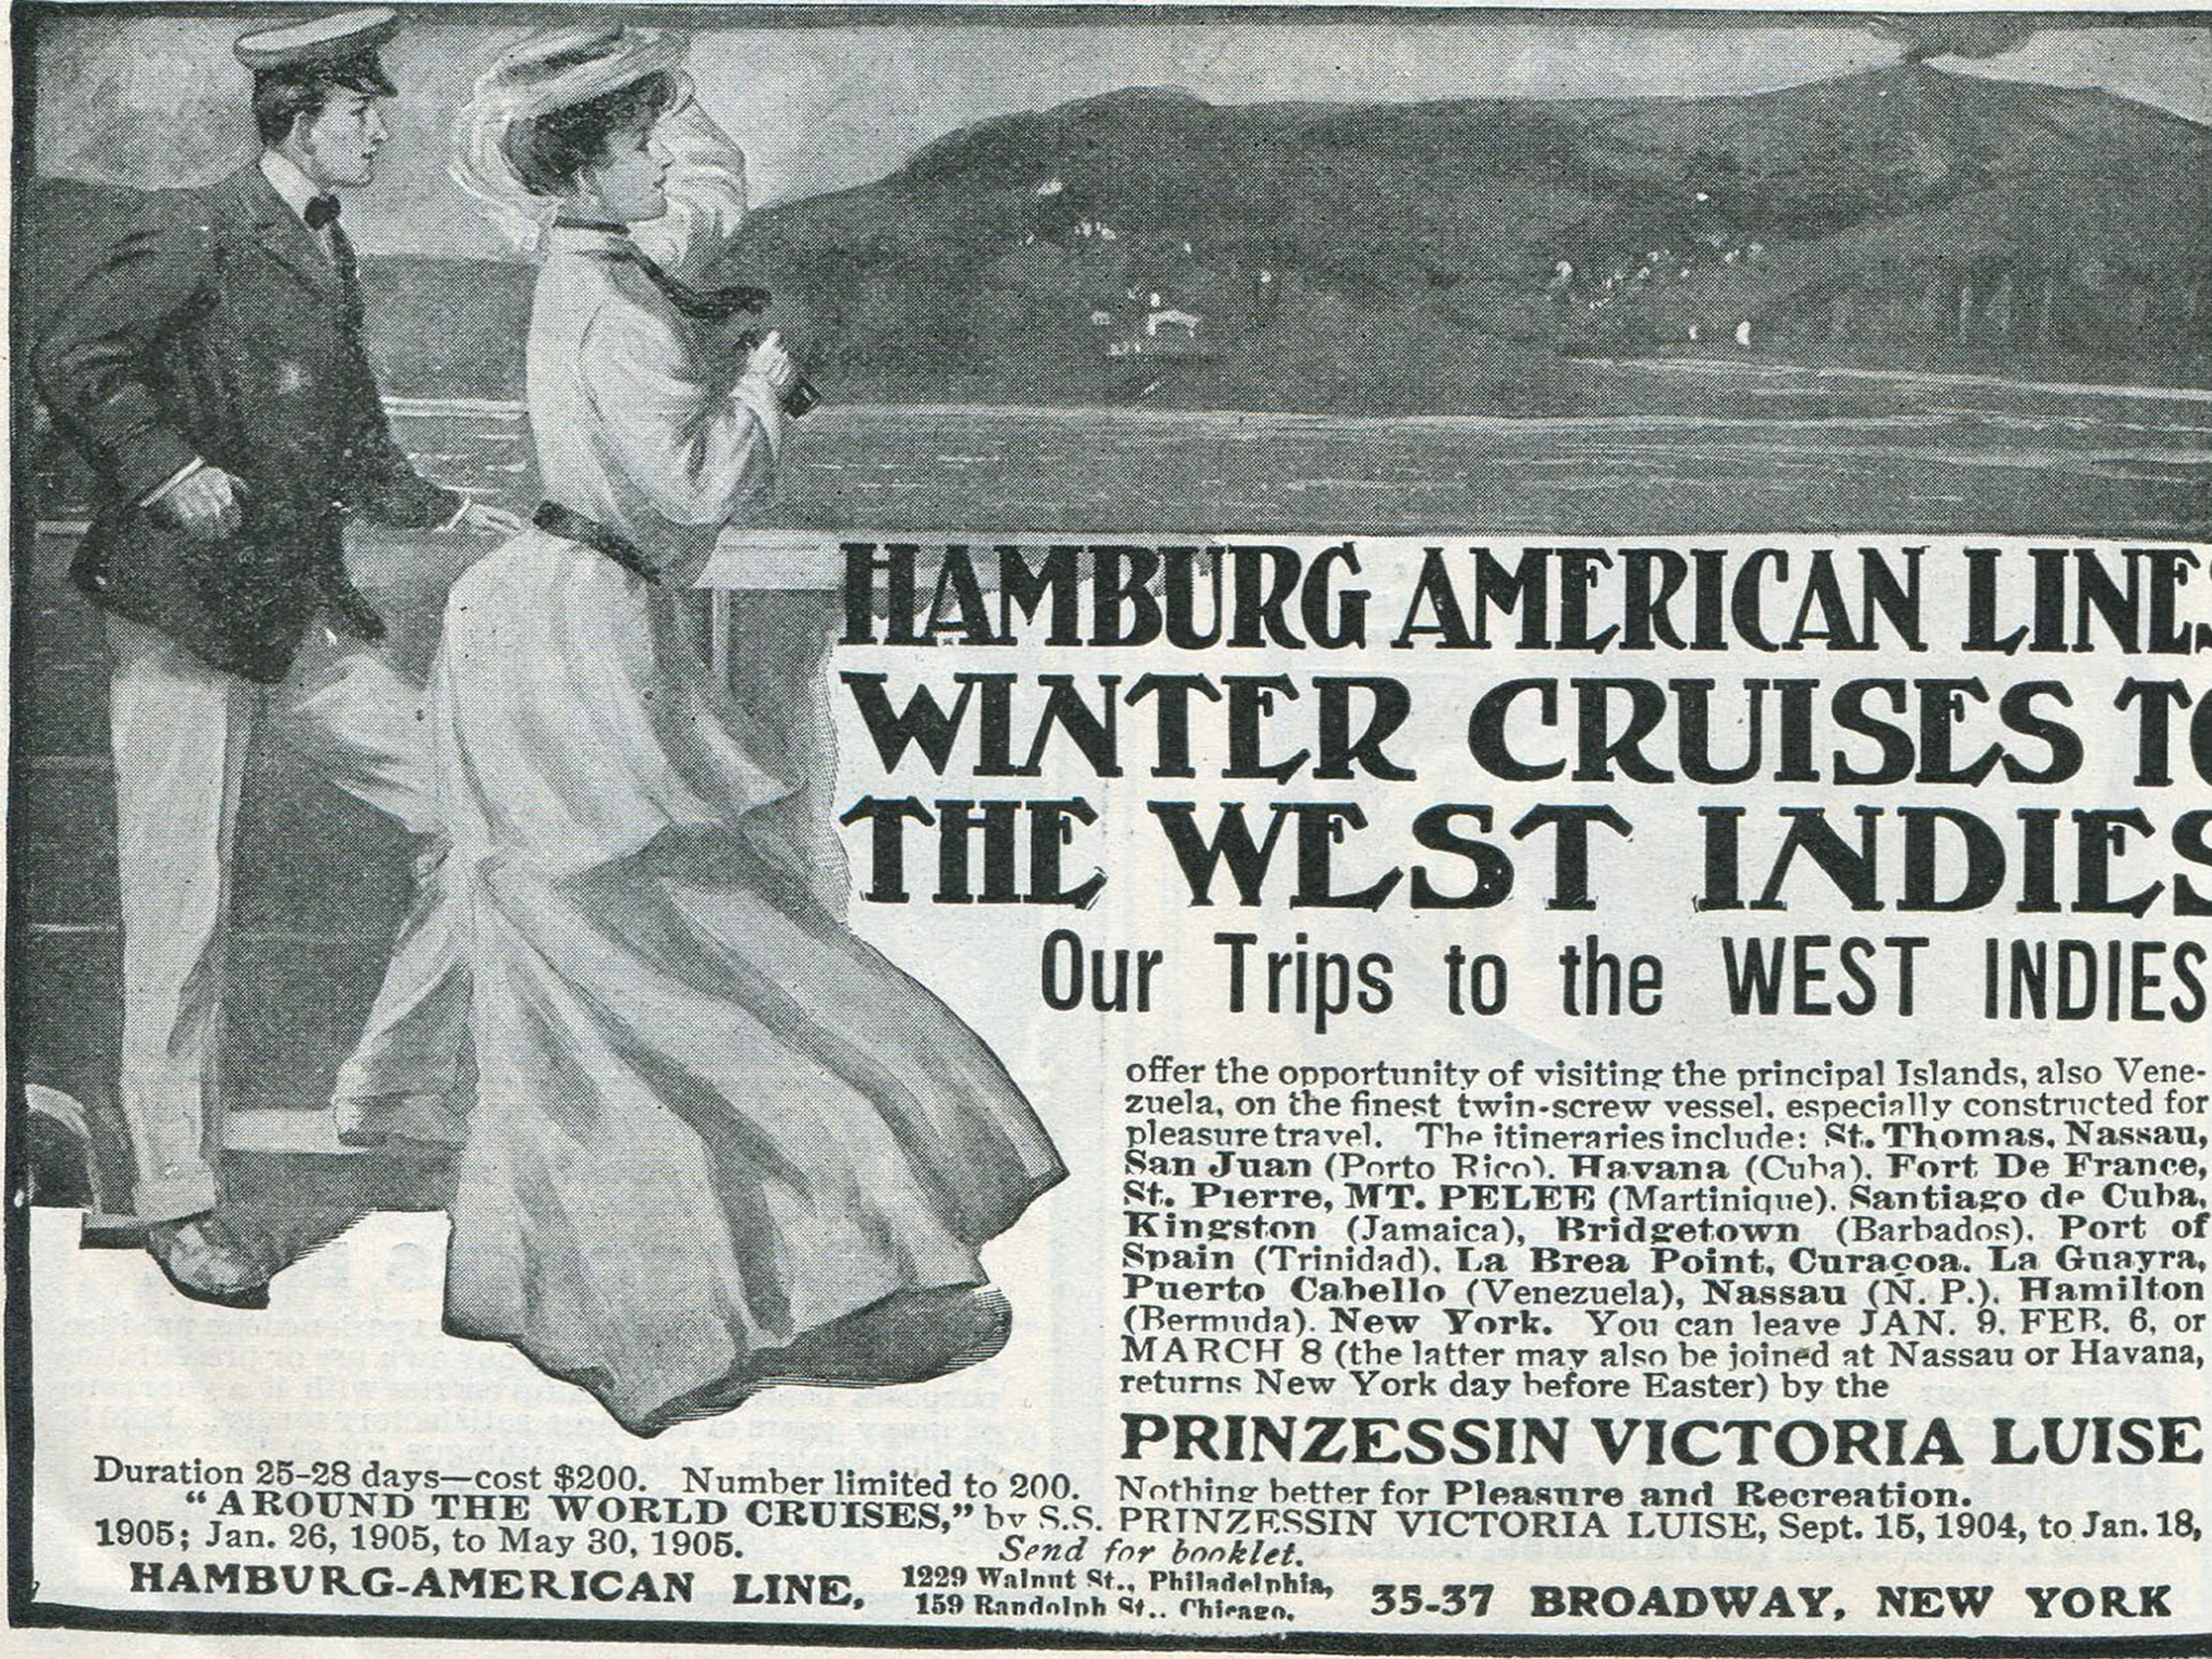 Advertisement for tours and cruises to the West Indies by the Hamburg American Line, New York, 1903.